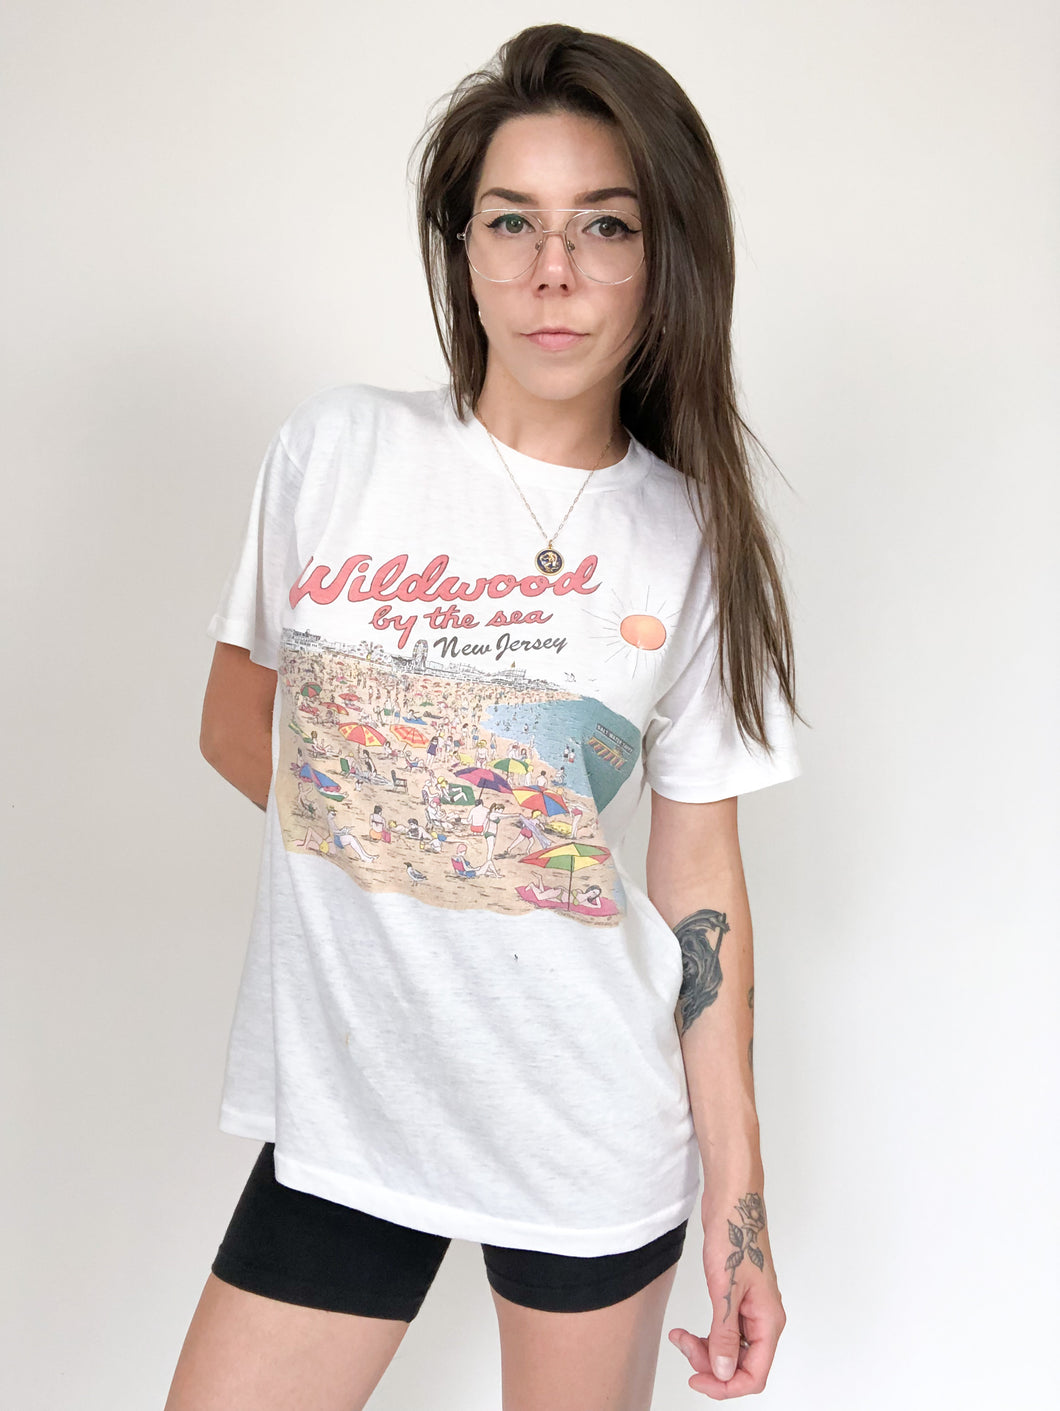 Vintage 80s/90s Wildwood By the Sea New Jersey Tee Size M